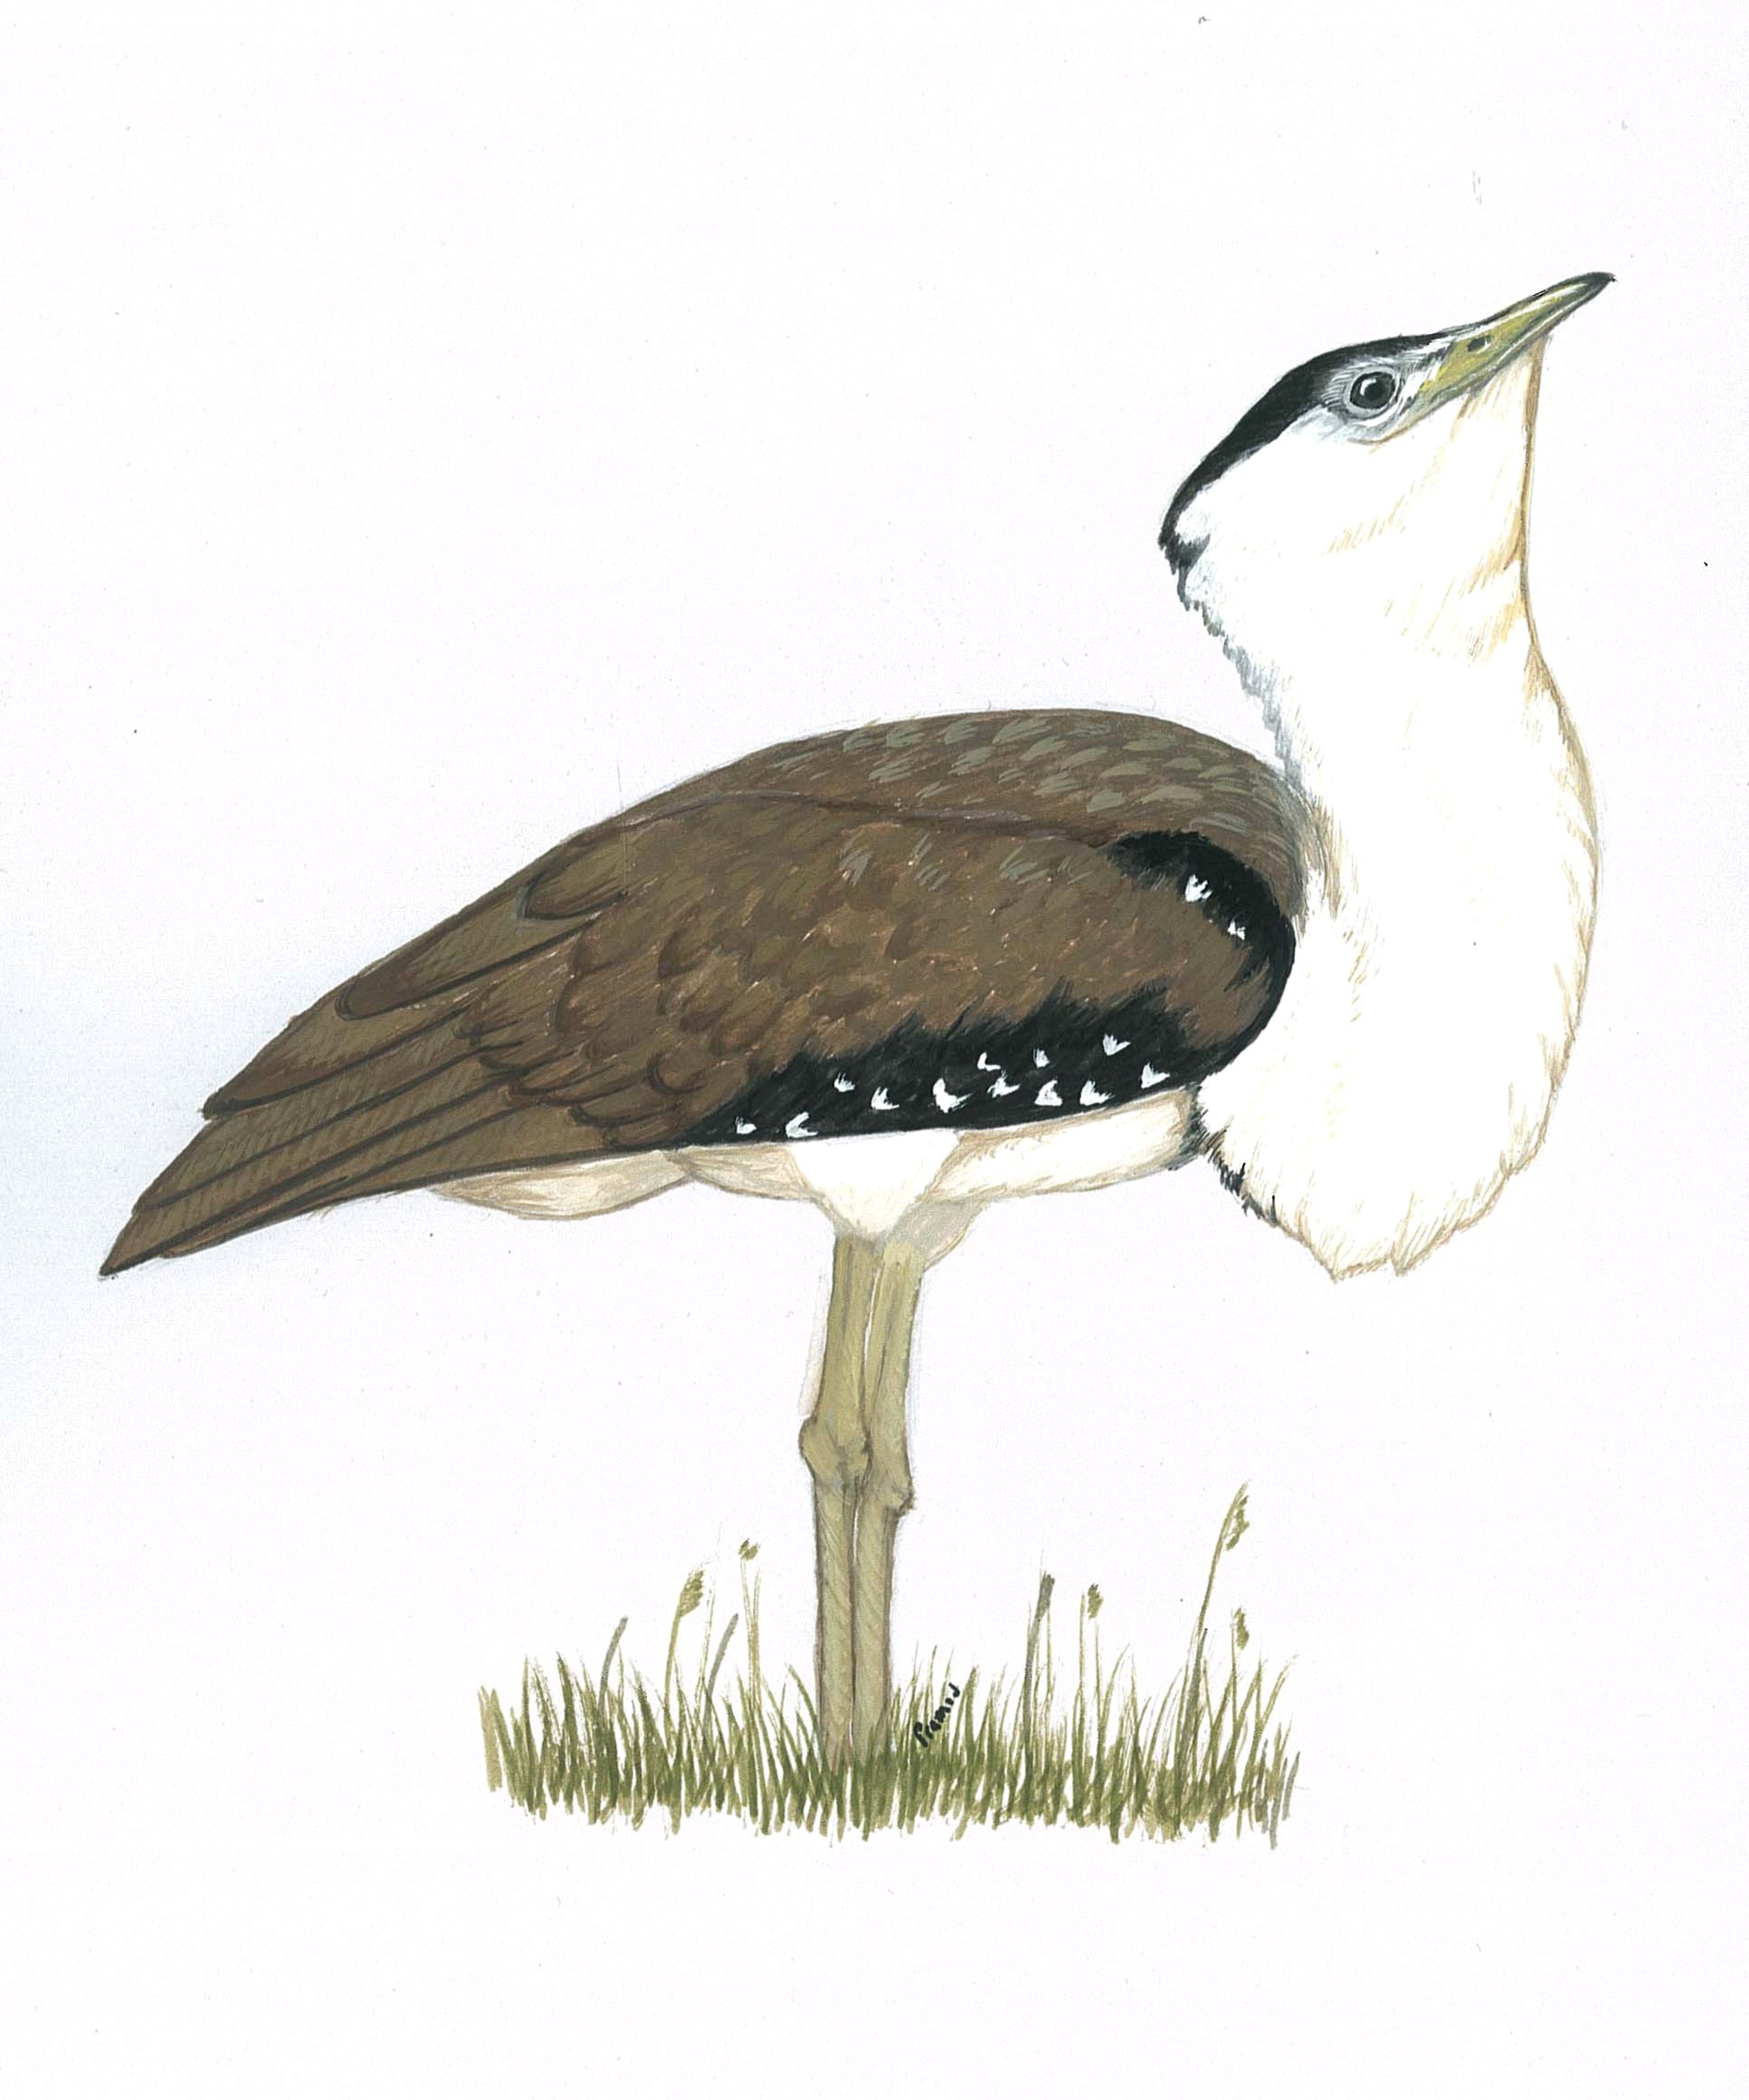 A sketch of the Great Indian Bustard by Dr. Patil